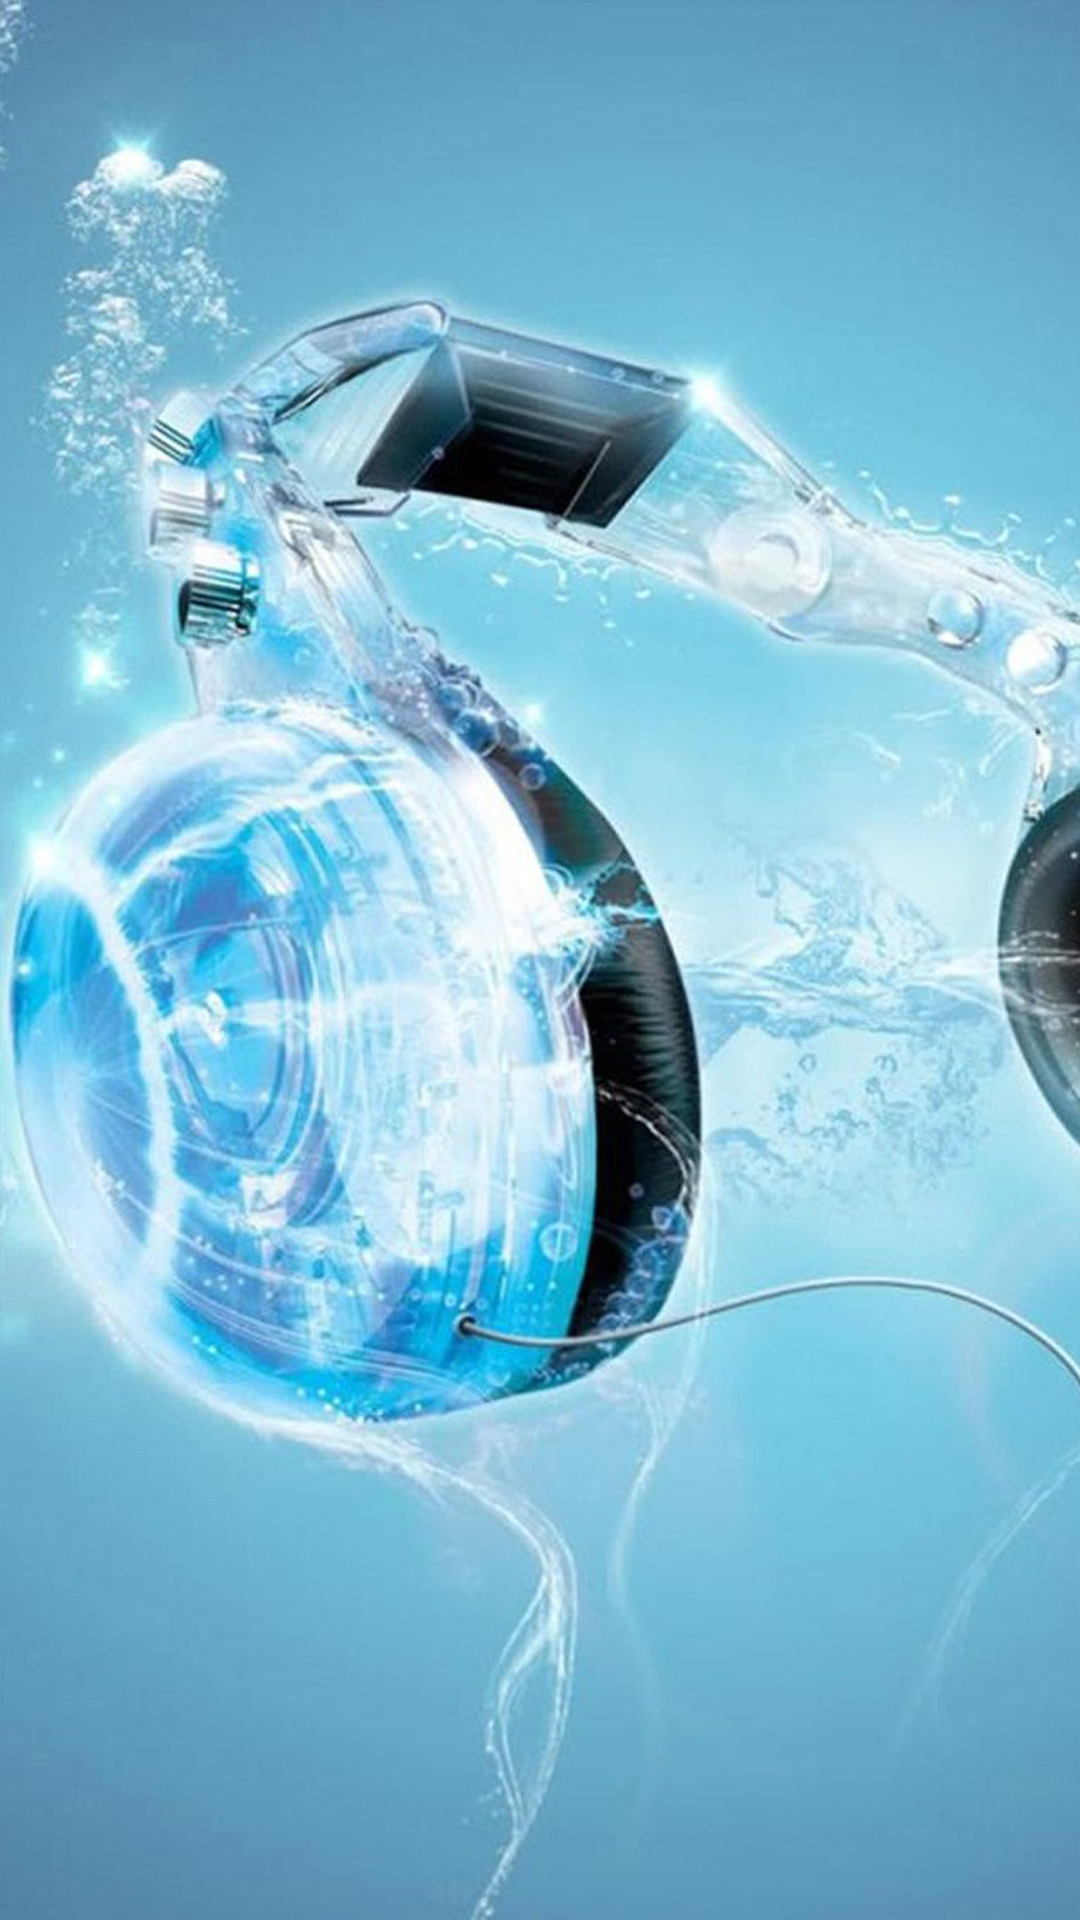 hd music wallpapers for android,water,technology,illustration,graphics,world